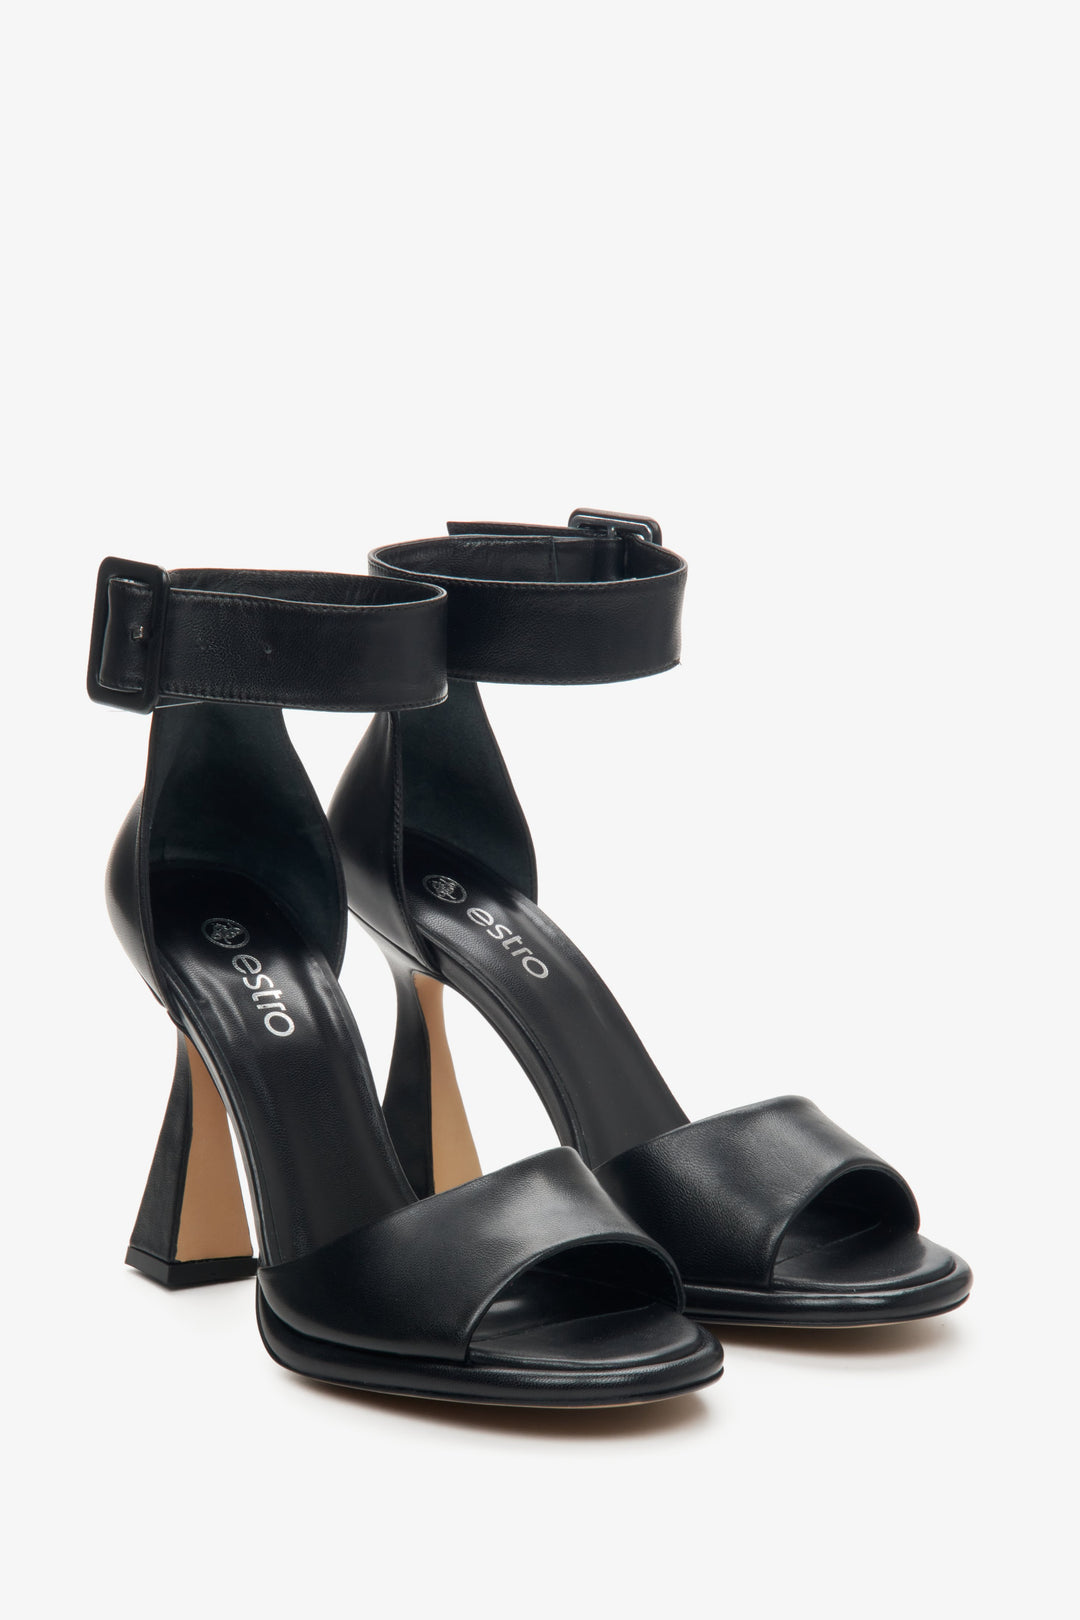 Women's sandals made of natural leather on a stiletto heel, fastened at the ankle., black colour.